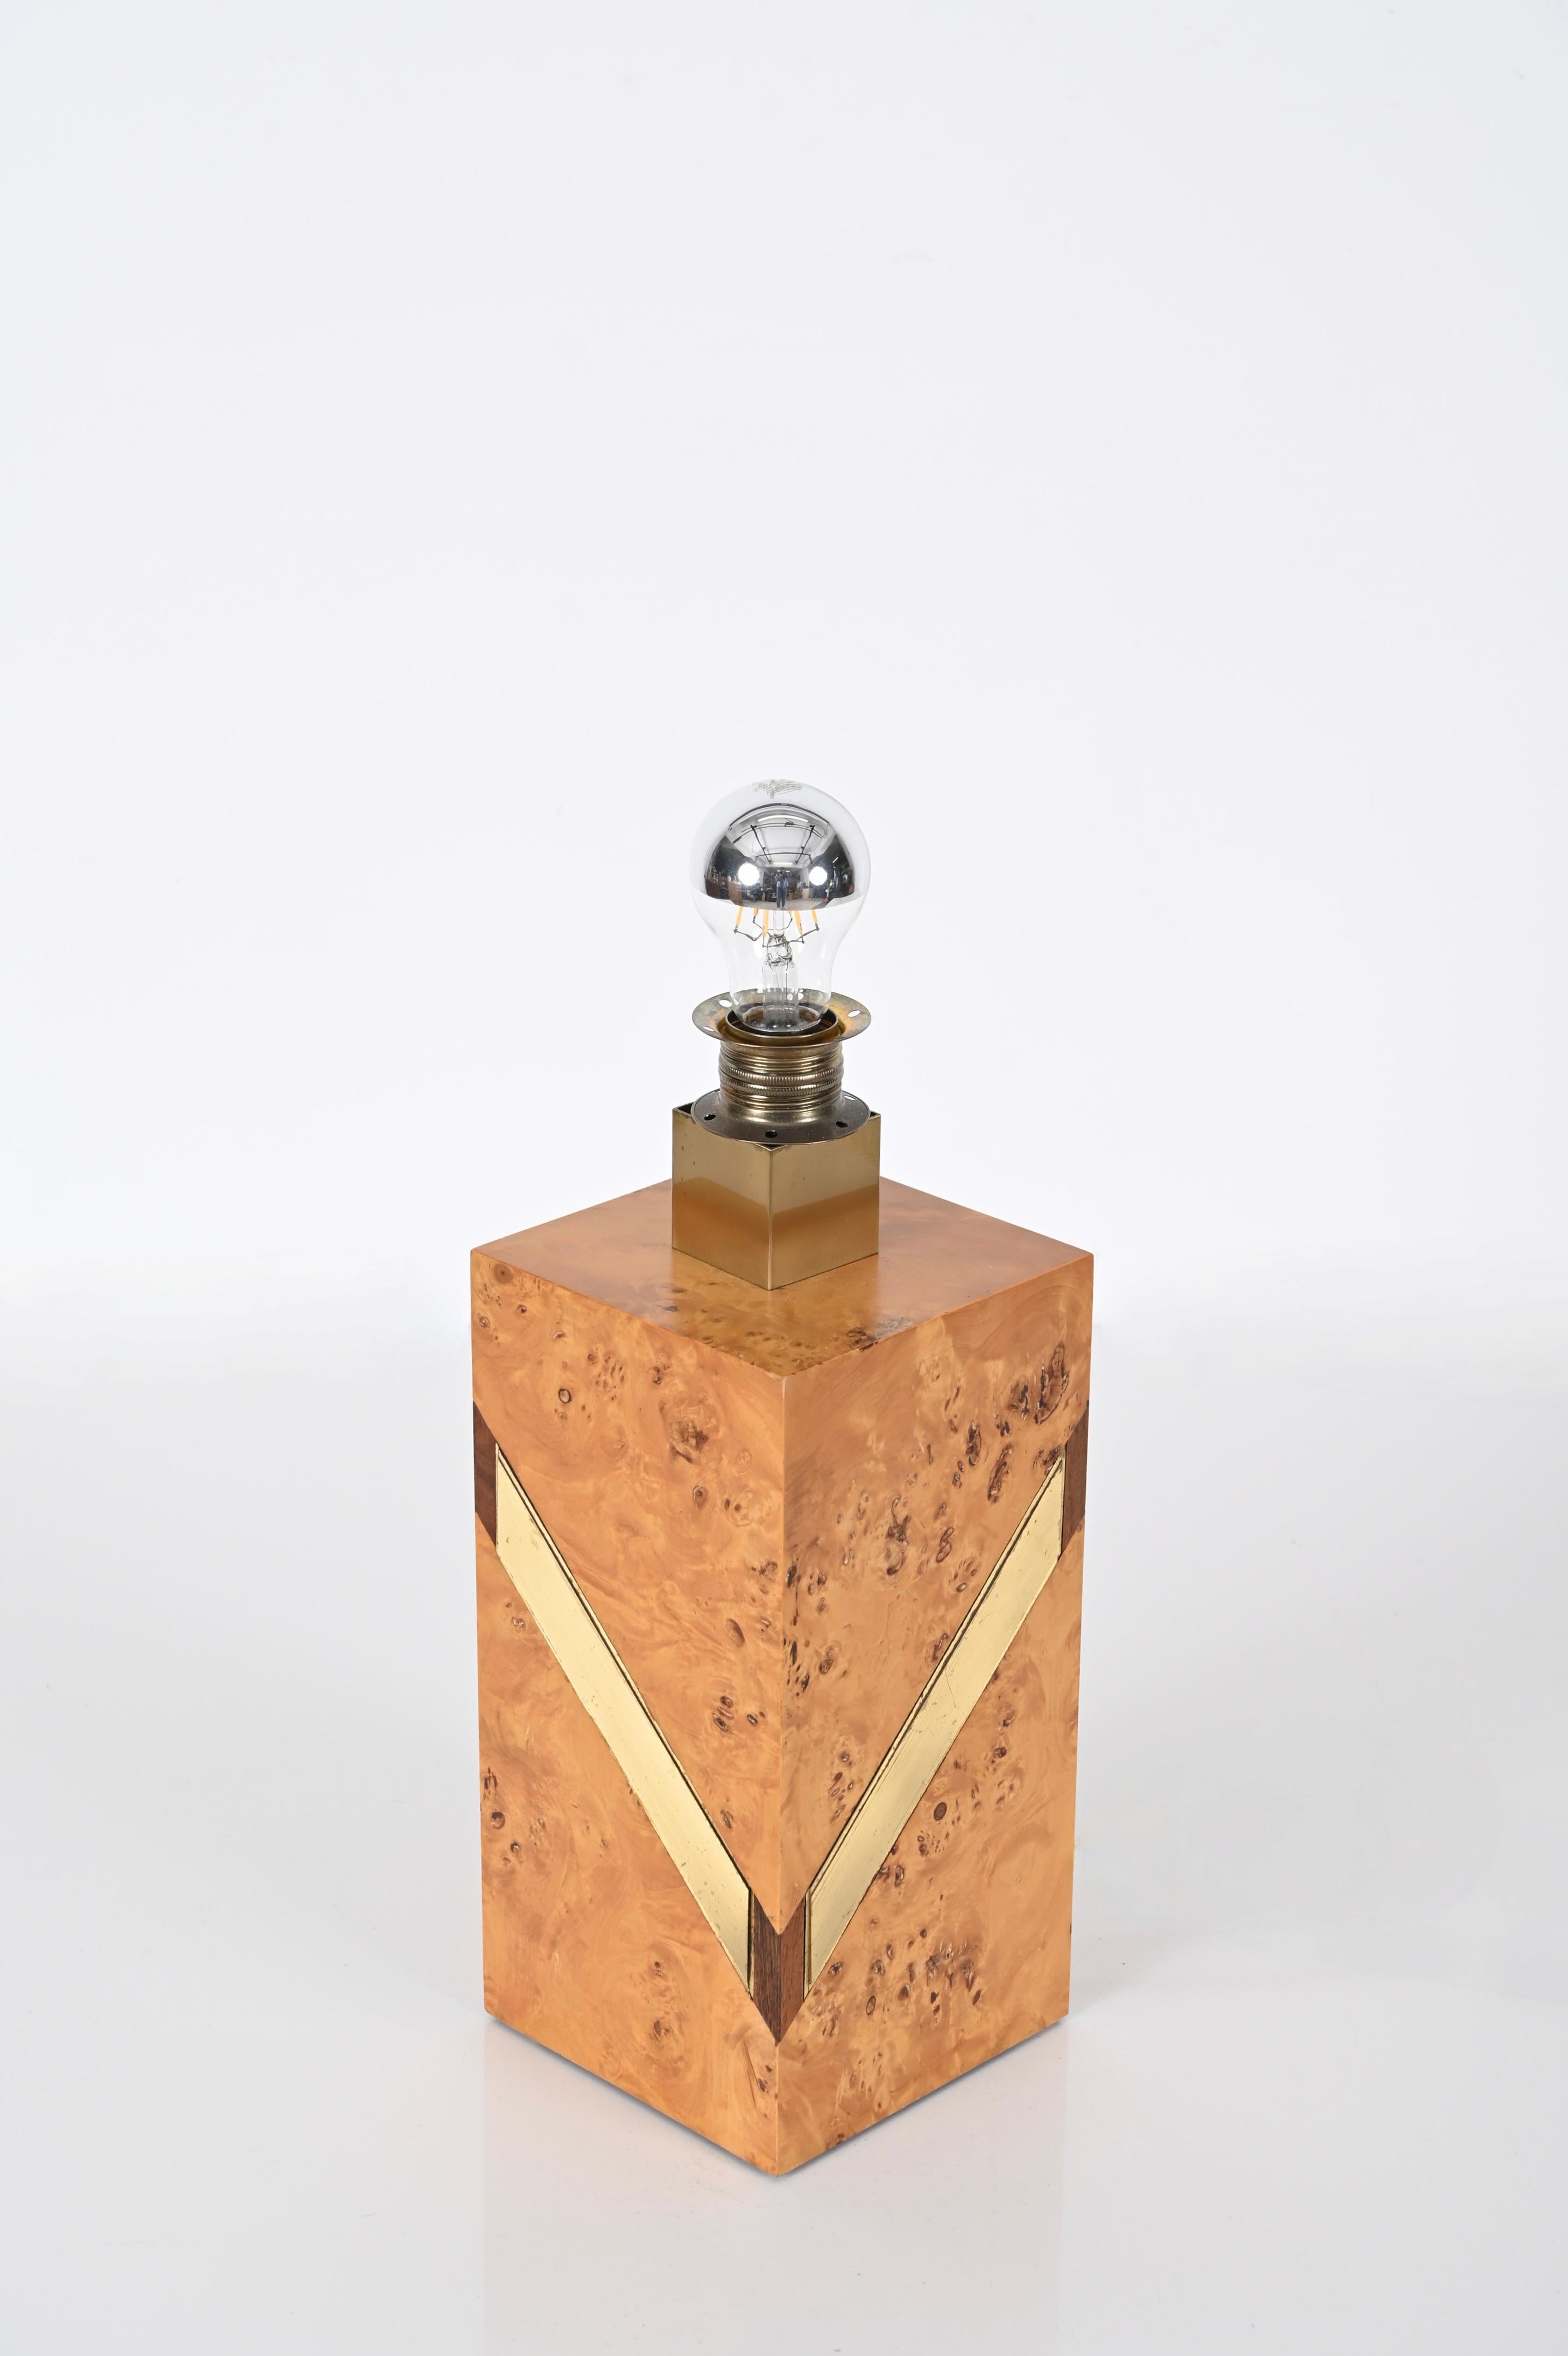 Stunning Italian table lamp in poplar burl and brass. This gorgeous lamp was designed by Tommaso Barbi and produced in Italy in the 1970s.

This splendid lamp features a square base in briar with brass and walnut wood accents. The contrast between